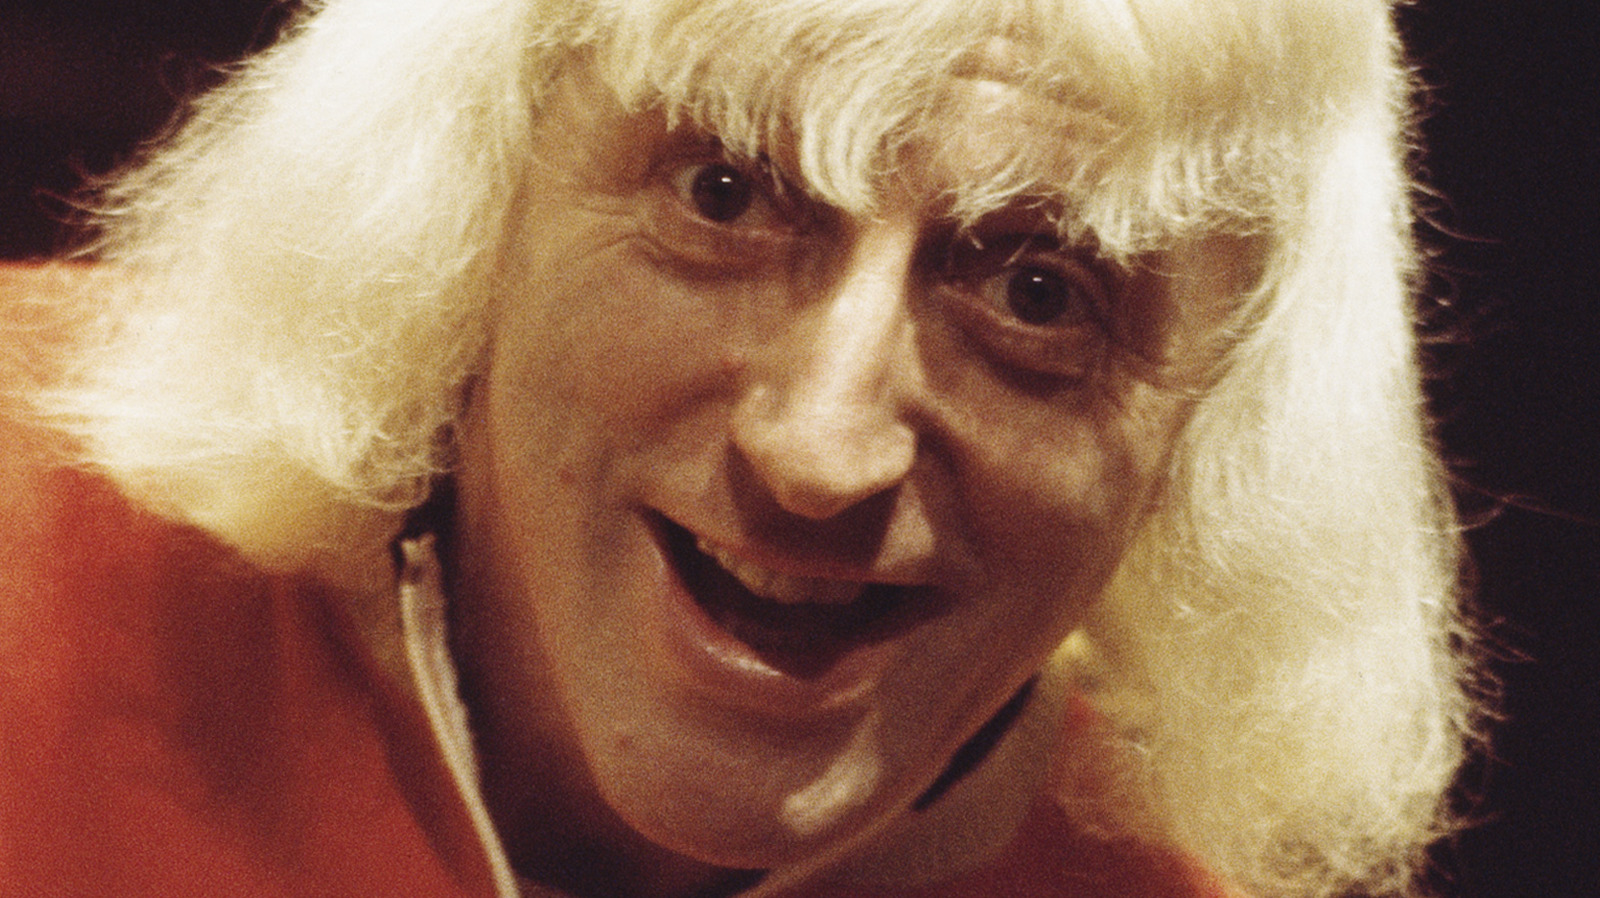 How Many Suspected Victims Did Jimmy Savile Have?